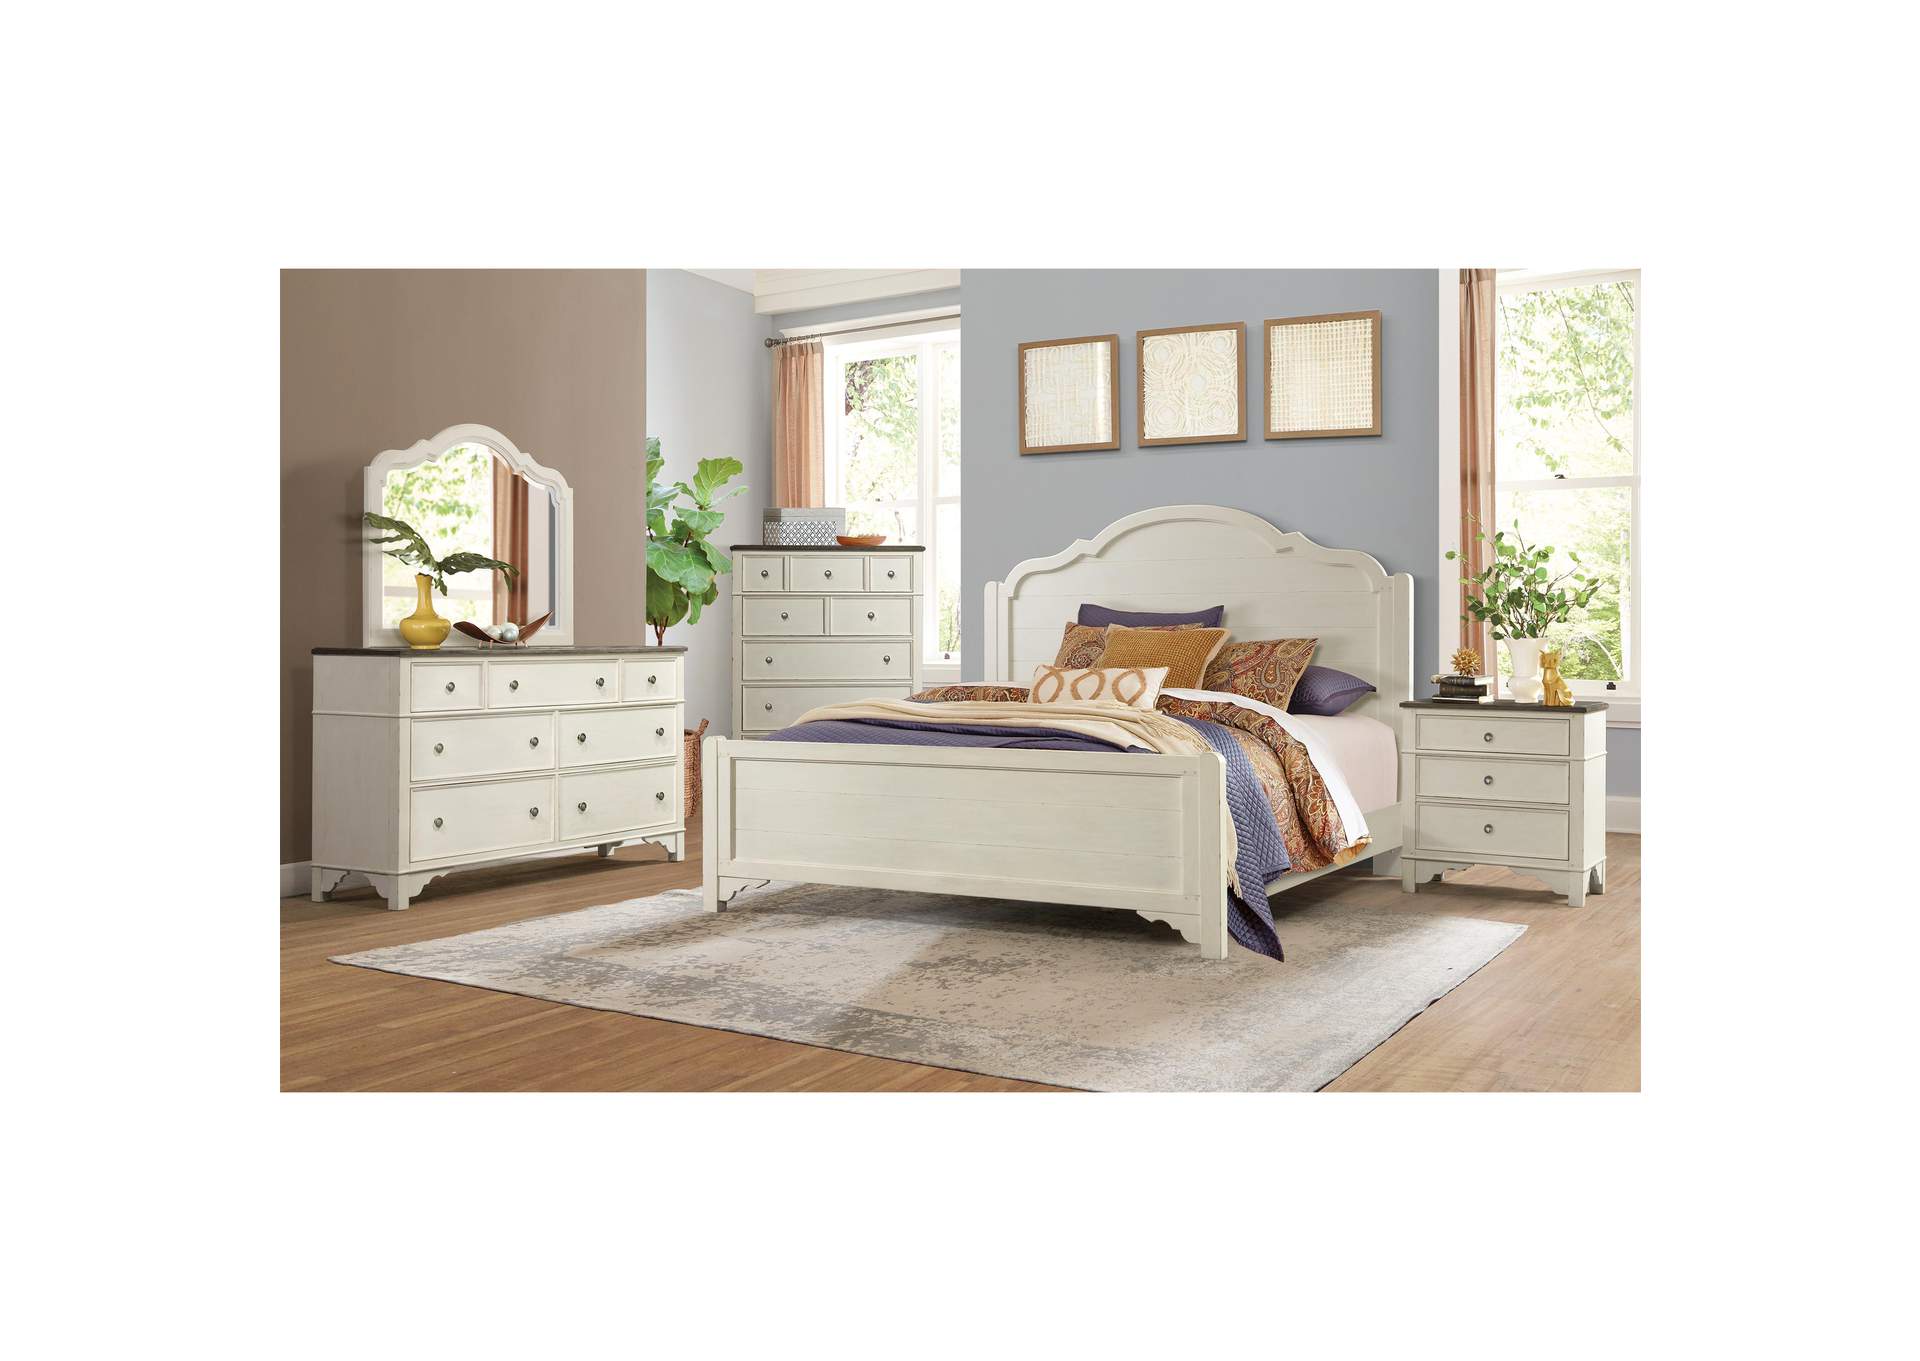 Grand Haven Feathered White Panel Queen Bed w/ Dresser, Mirror,Riverside